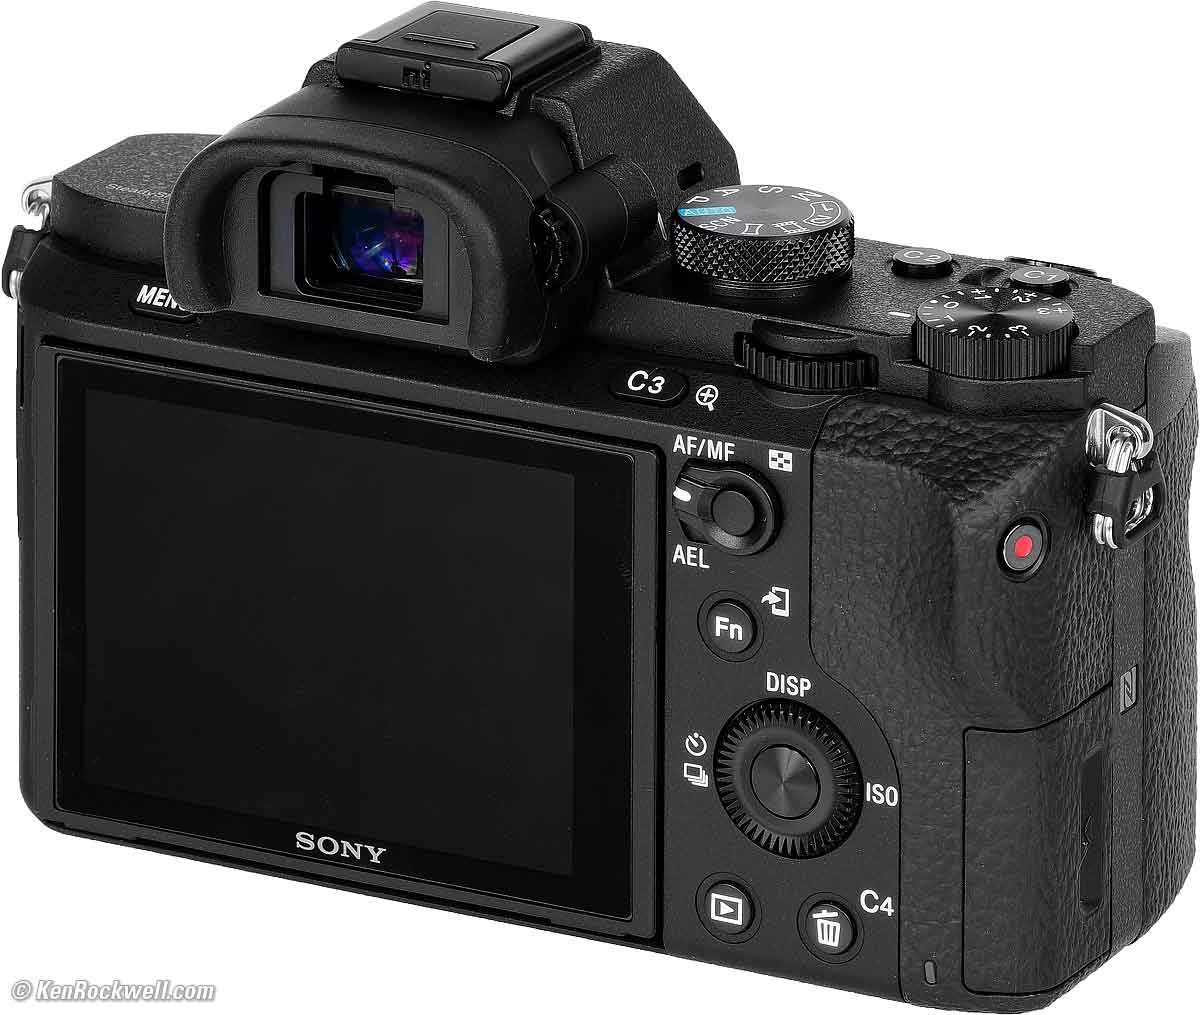 Sony Alpha A7 Mark II ILCE-7M2 Review